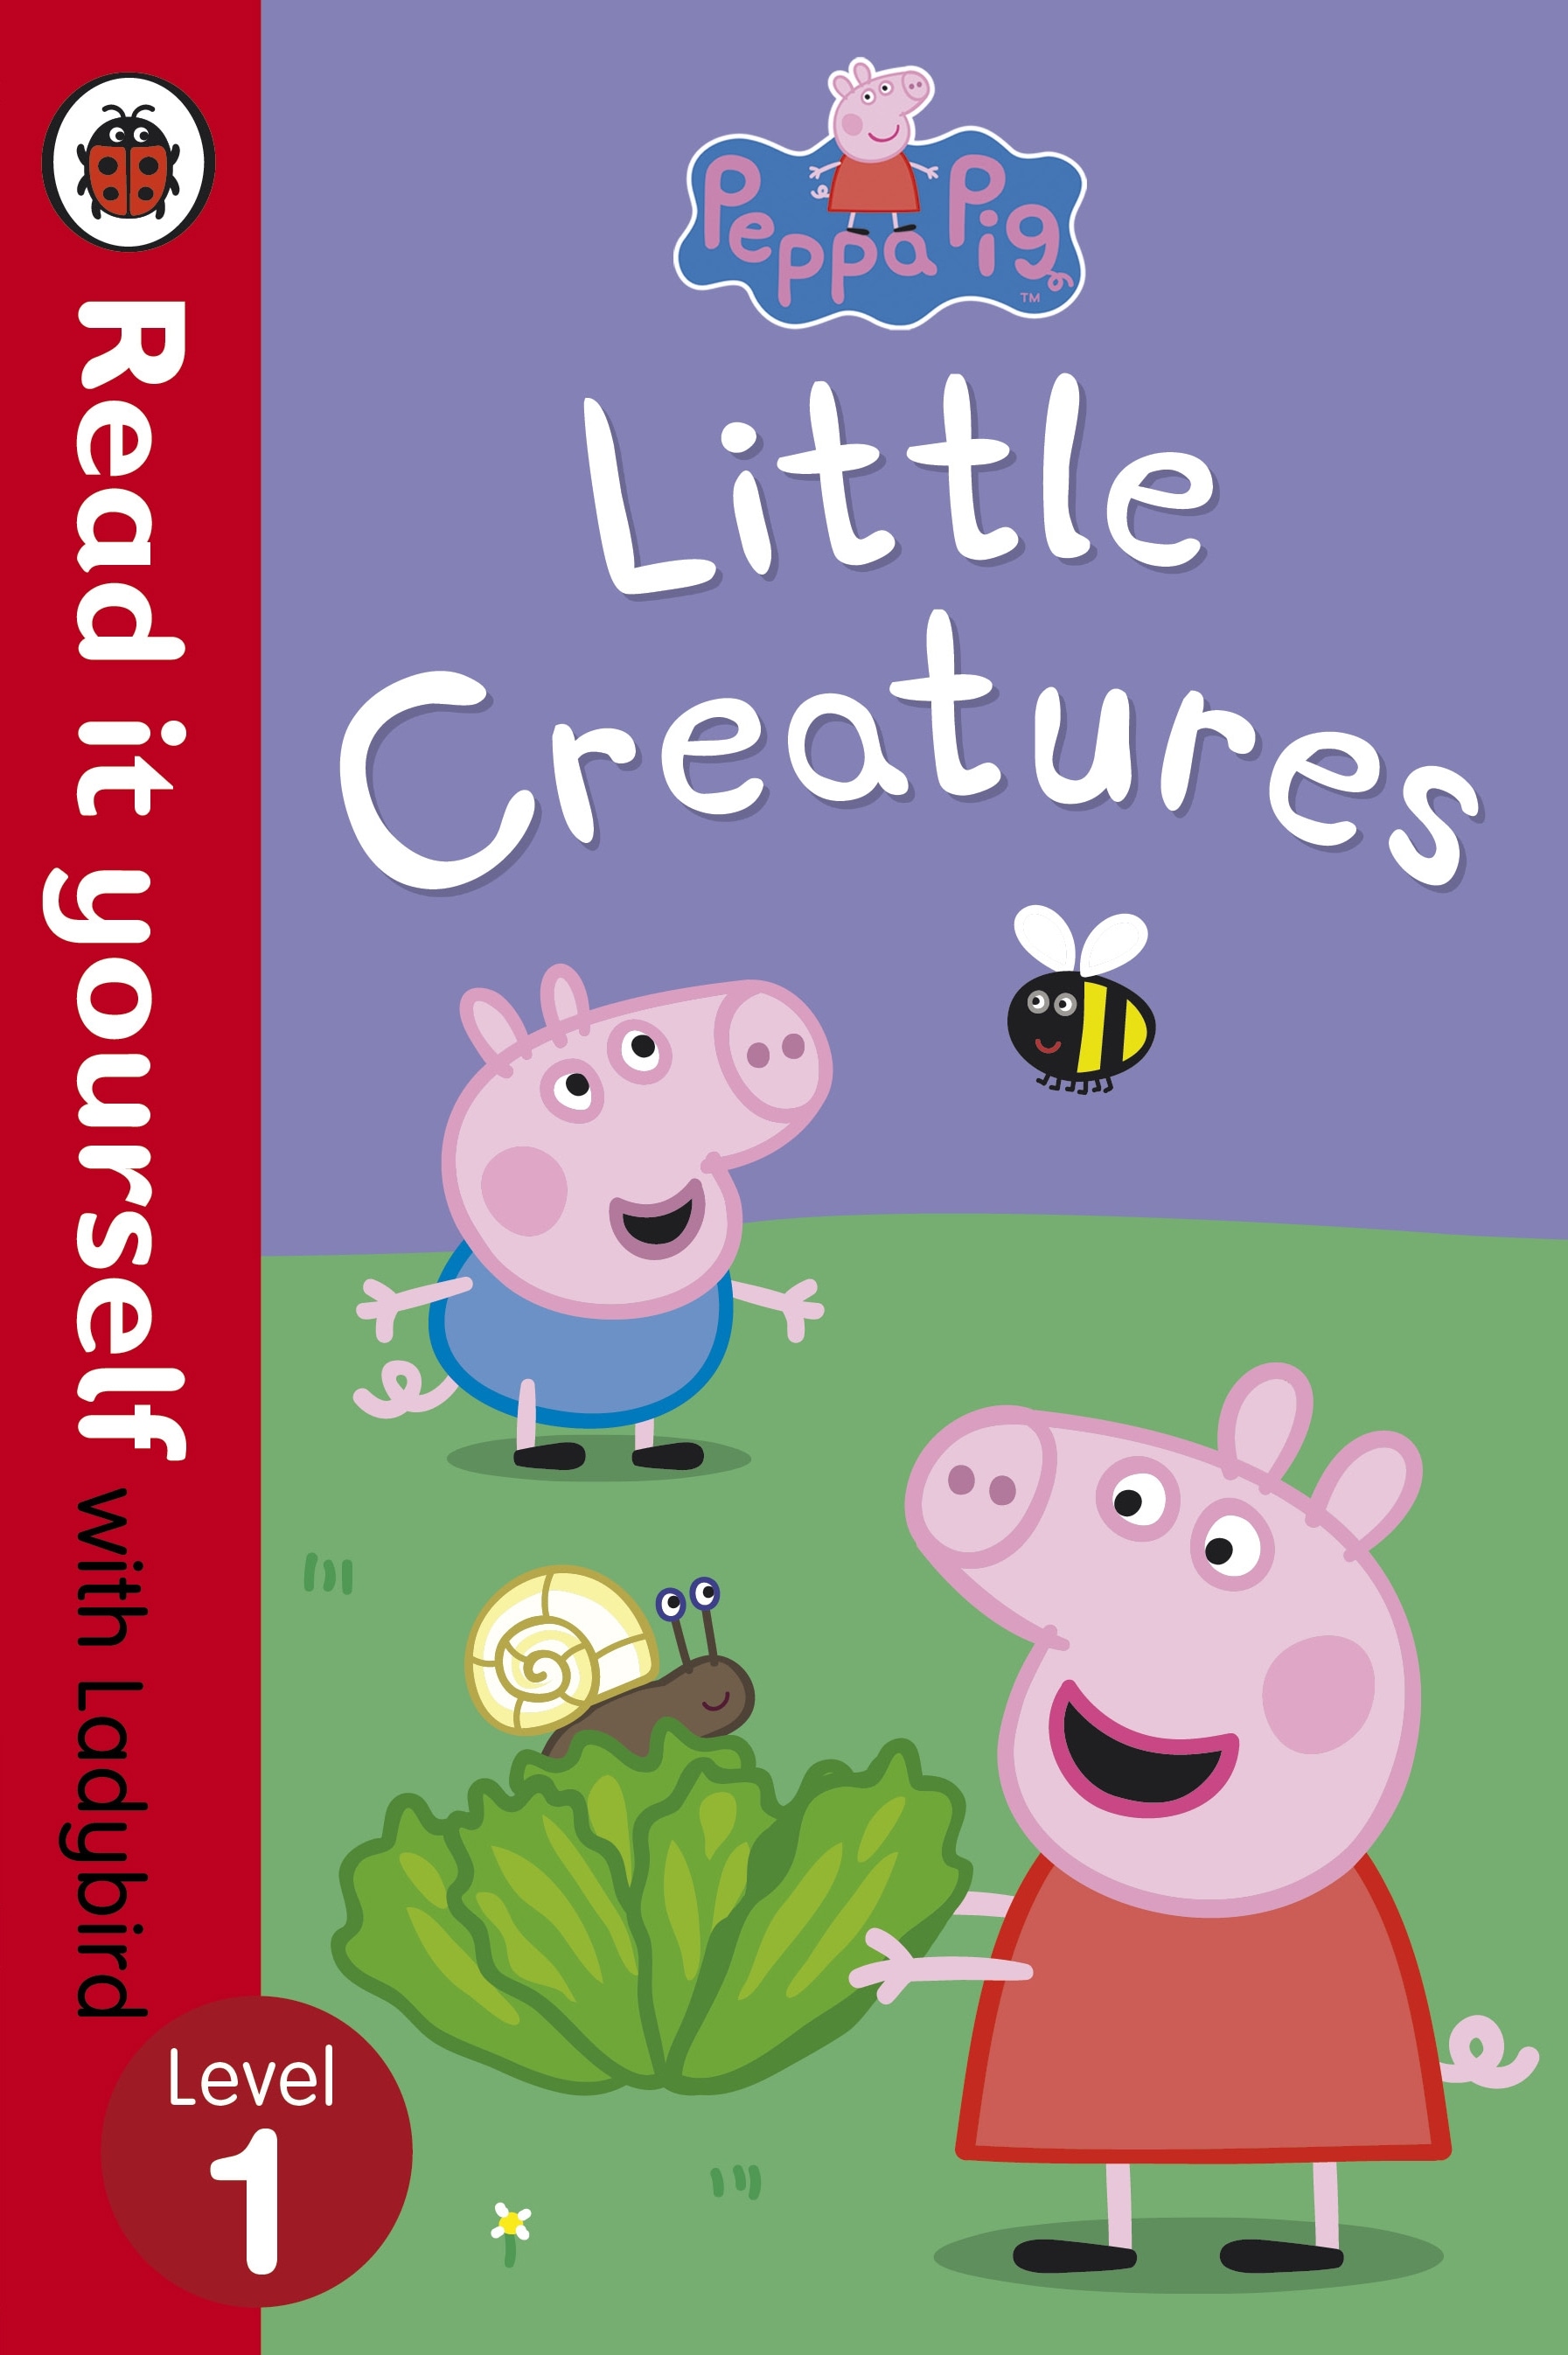 Book “Peppa Pig: Little Creatures - Read it yourself with Ladybird” by Ladybird, Peppa Pig — July 4, 2013